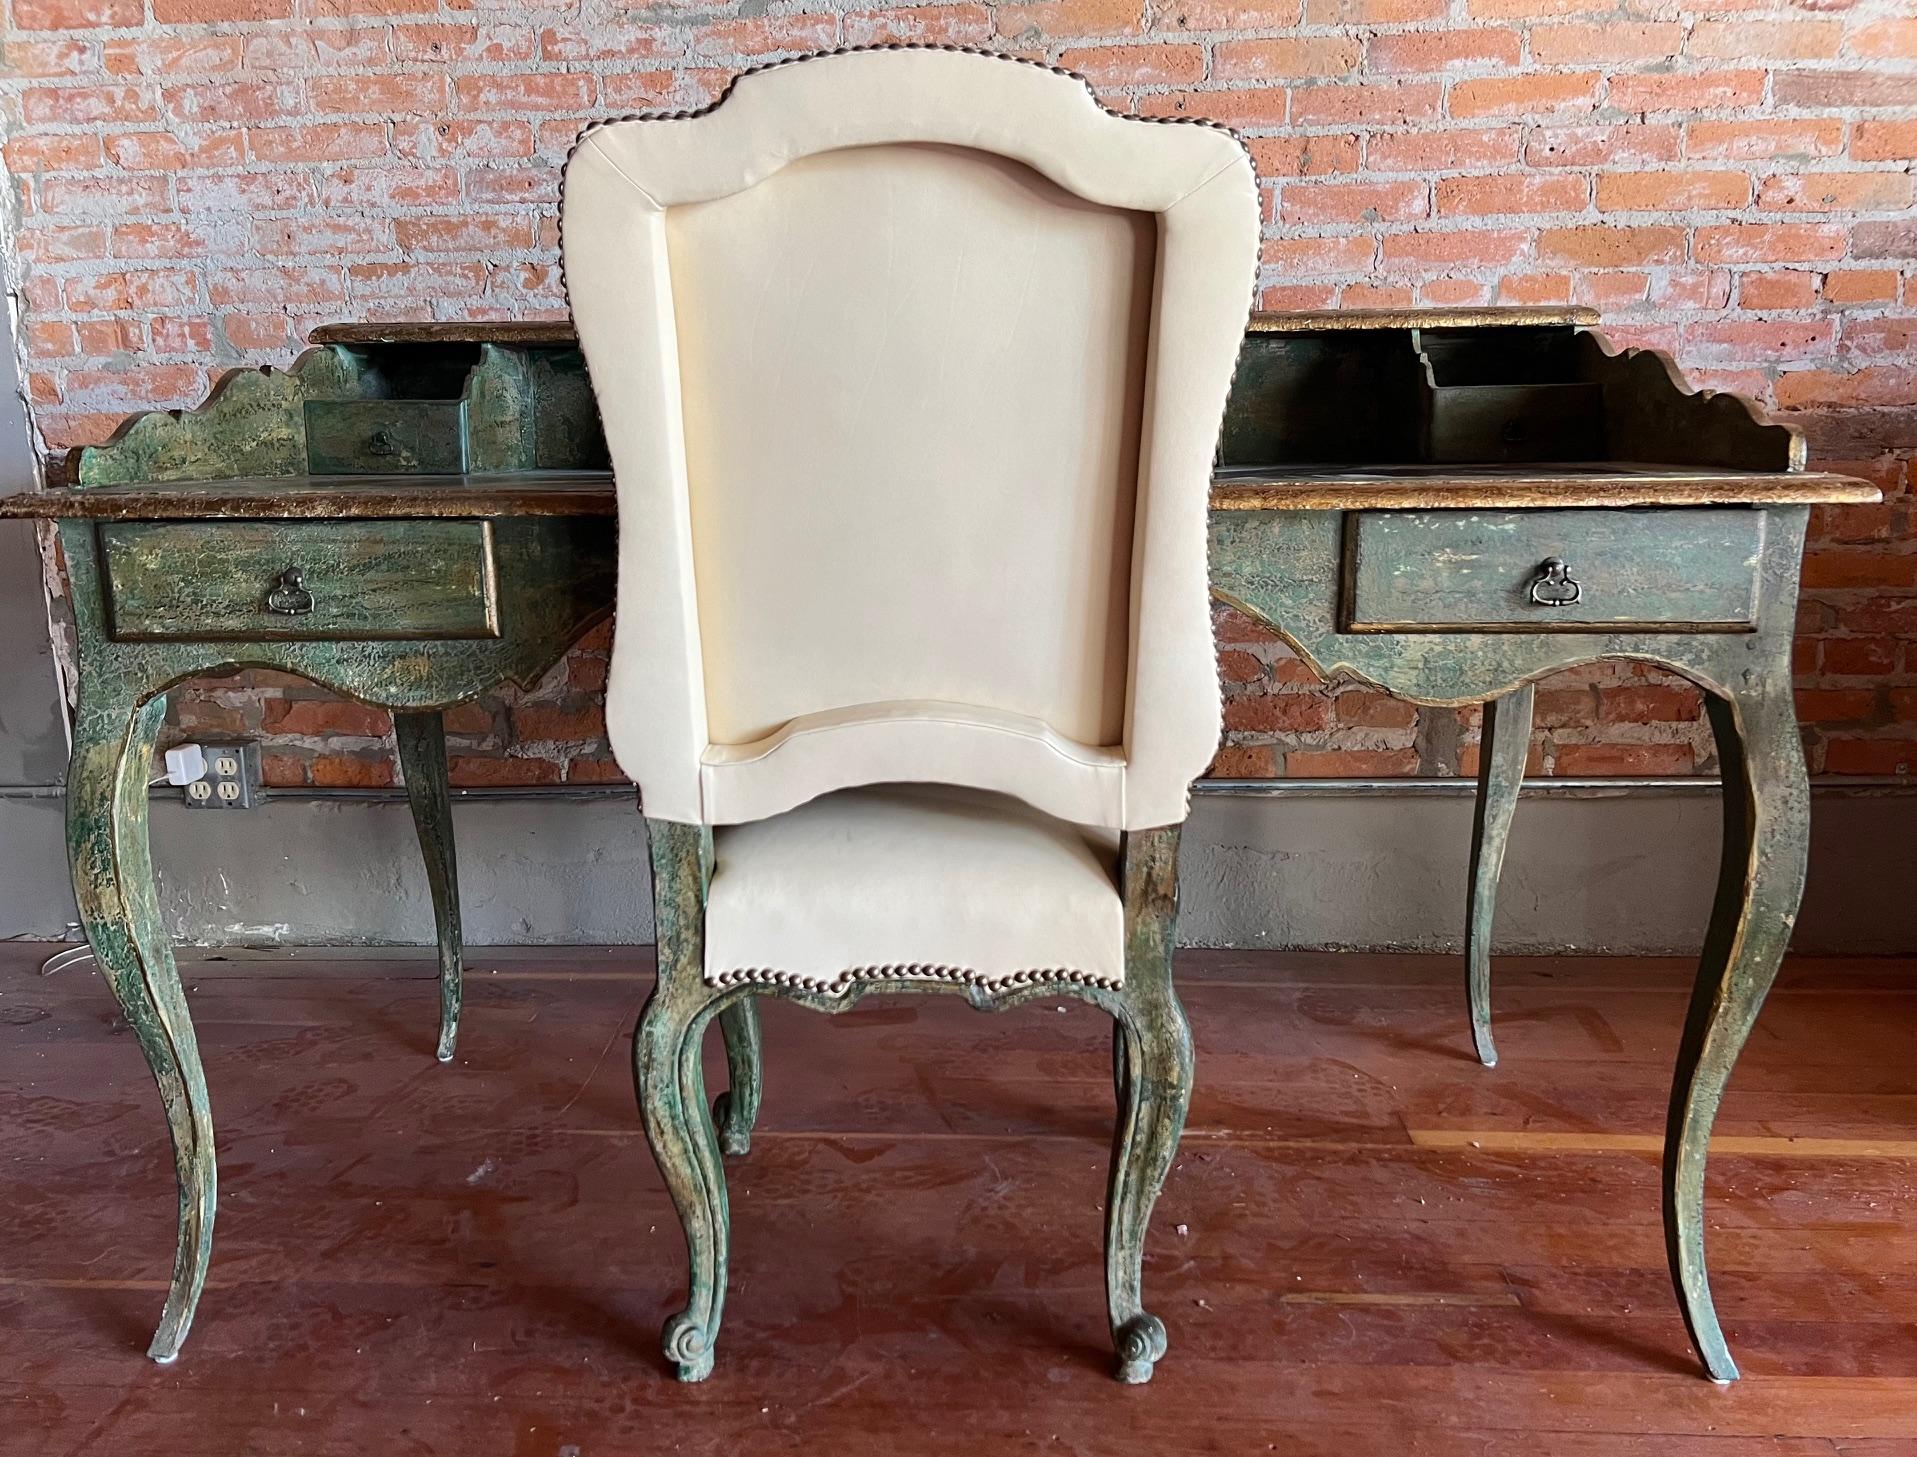 Custom fine reproduction of an 18th century desk and chair are one of a kind, and hand crafted. The finish is called Jade Apple  The desk has a leather top. The chair and desk have matching finishes, the chair is also covered in white leather, has